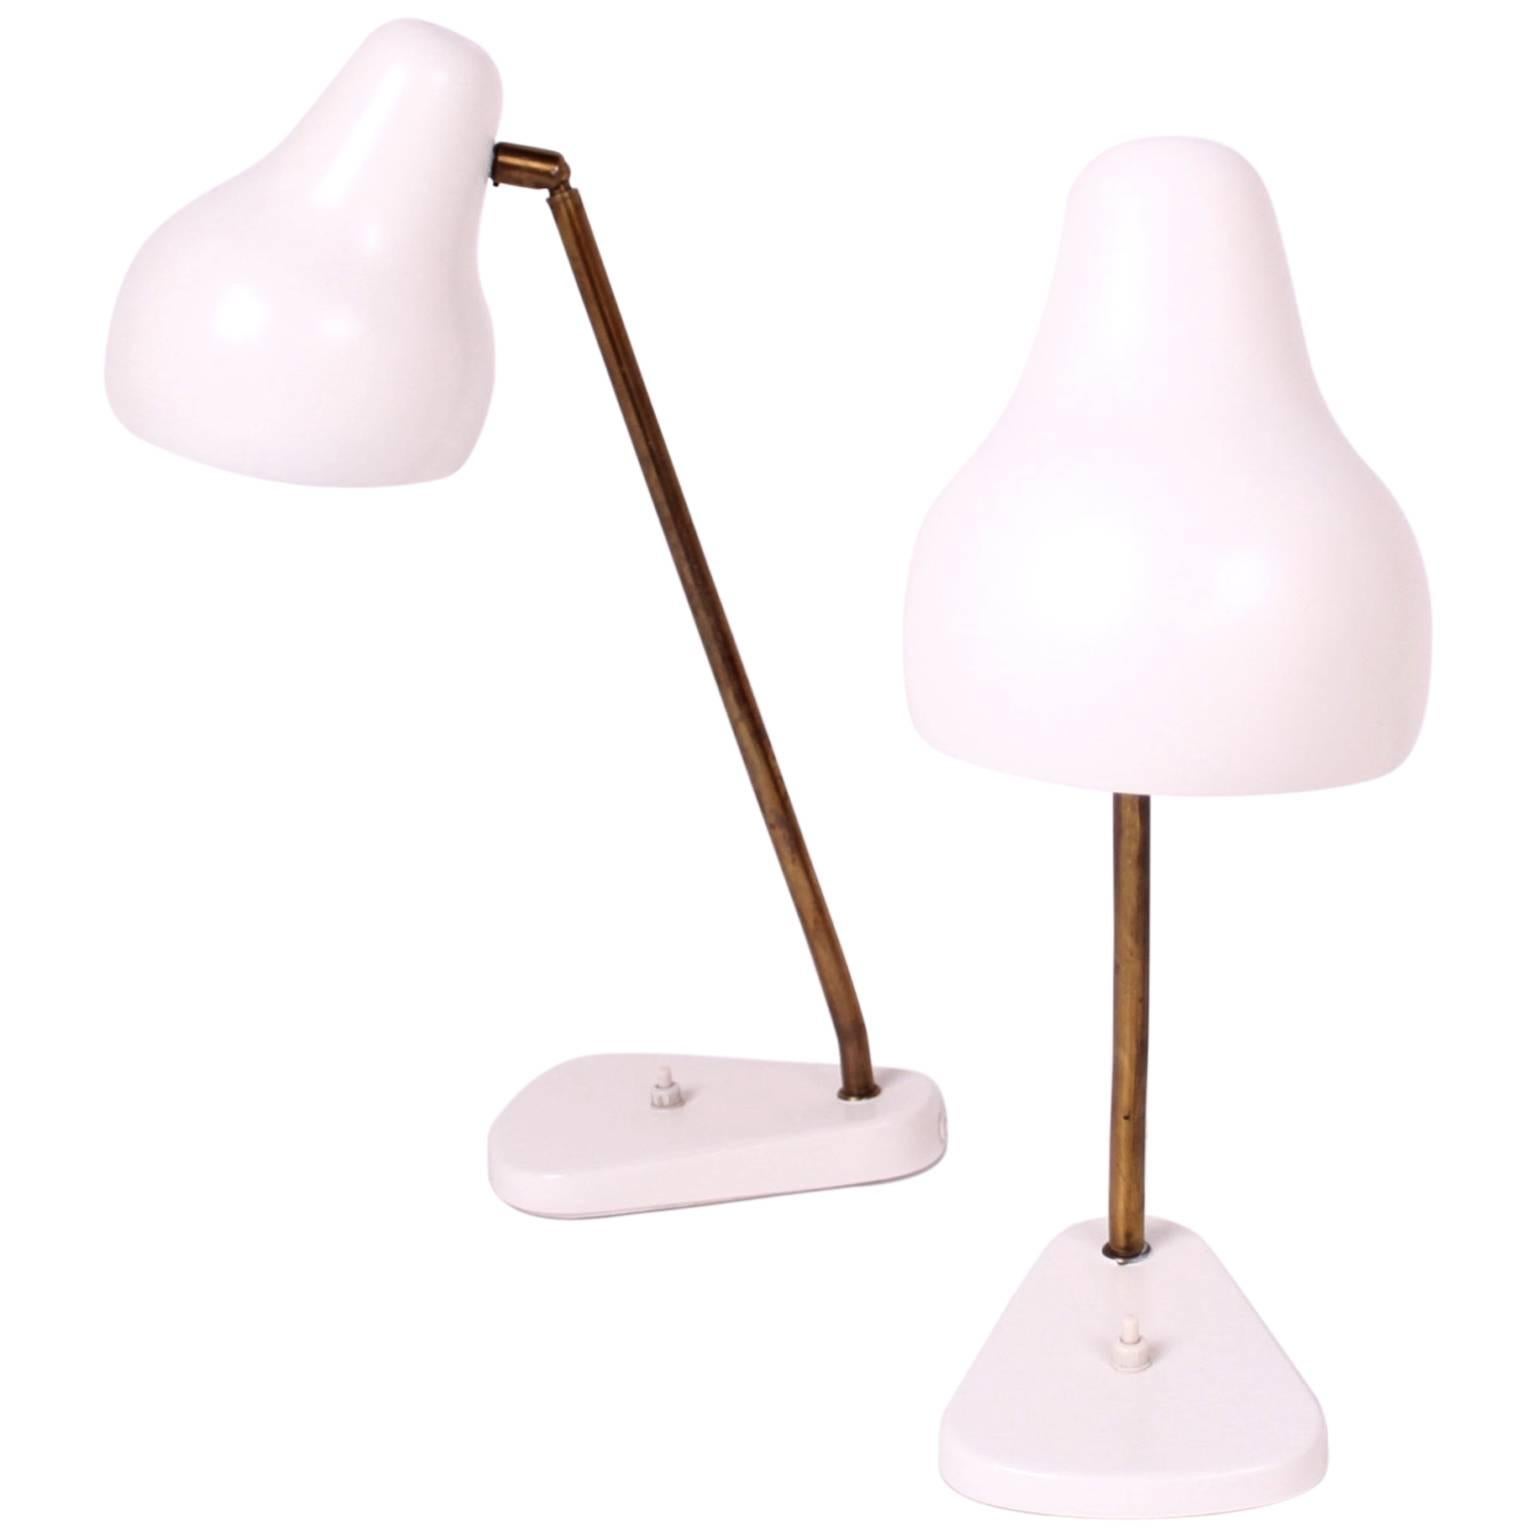 Vilhelm Lauritzen, Pair of Table Lights in White Painted Aluminum and Brass